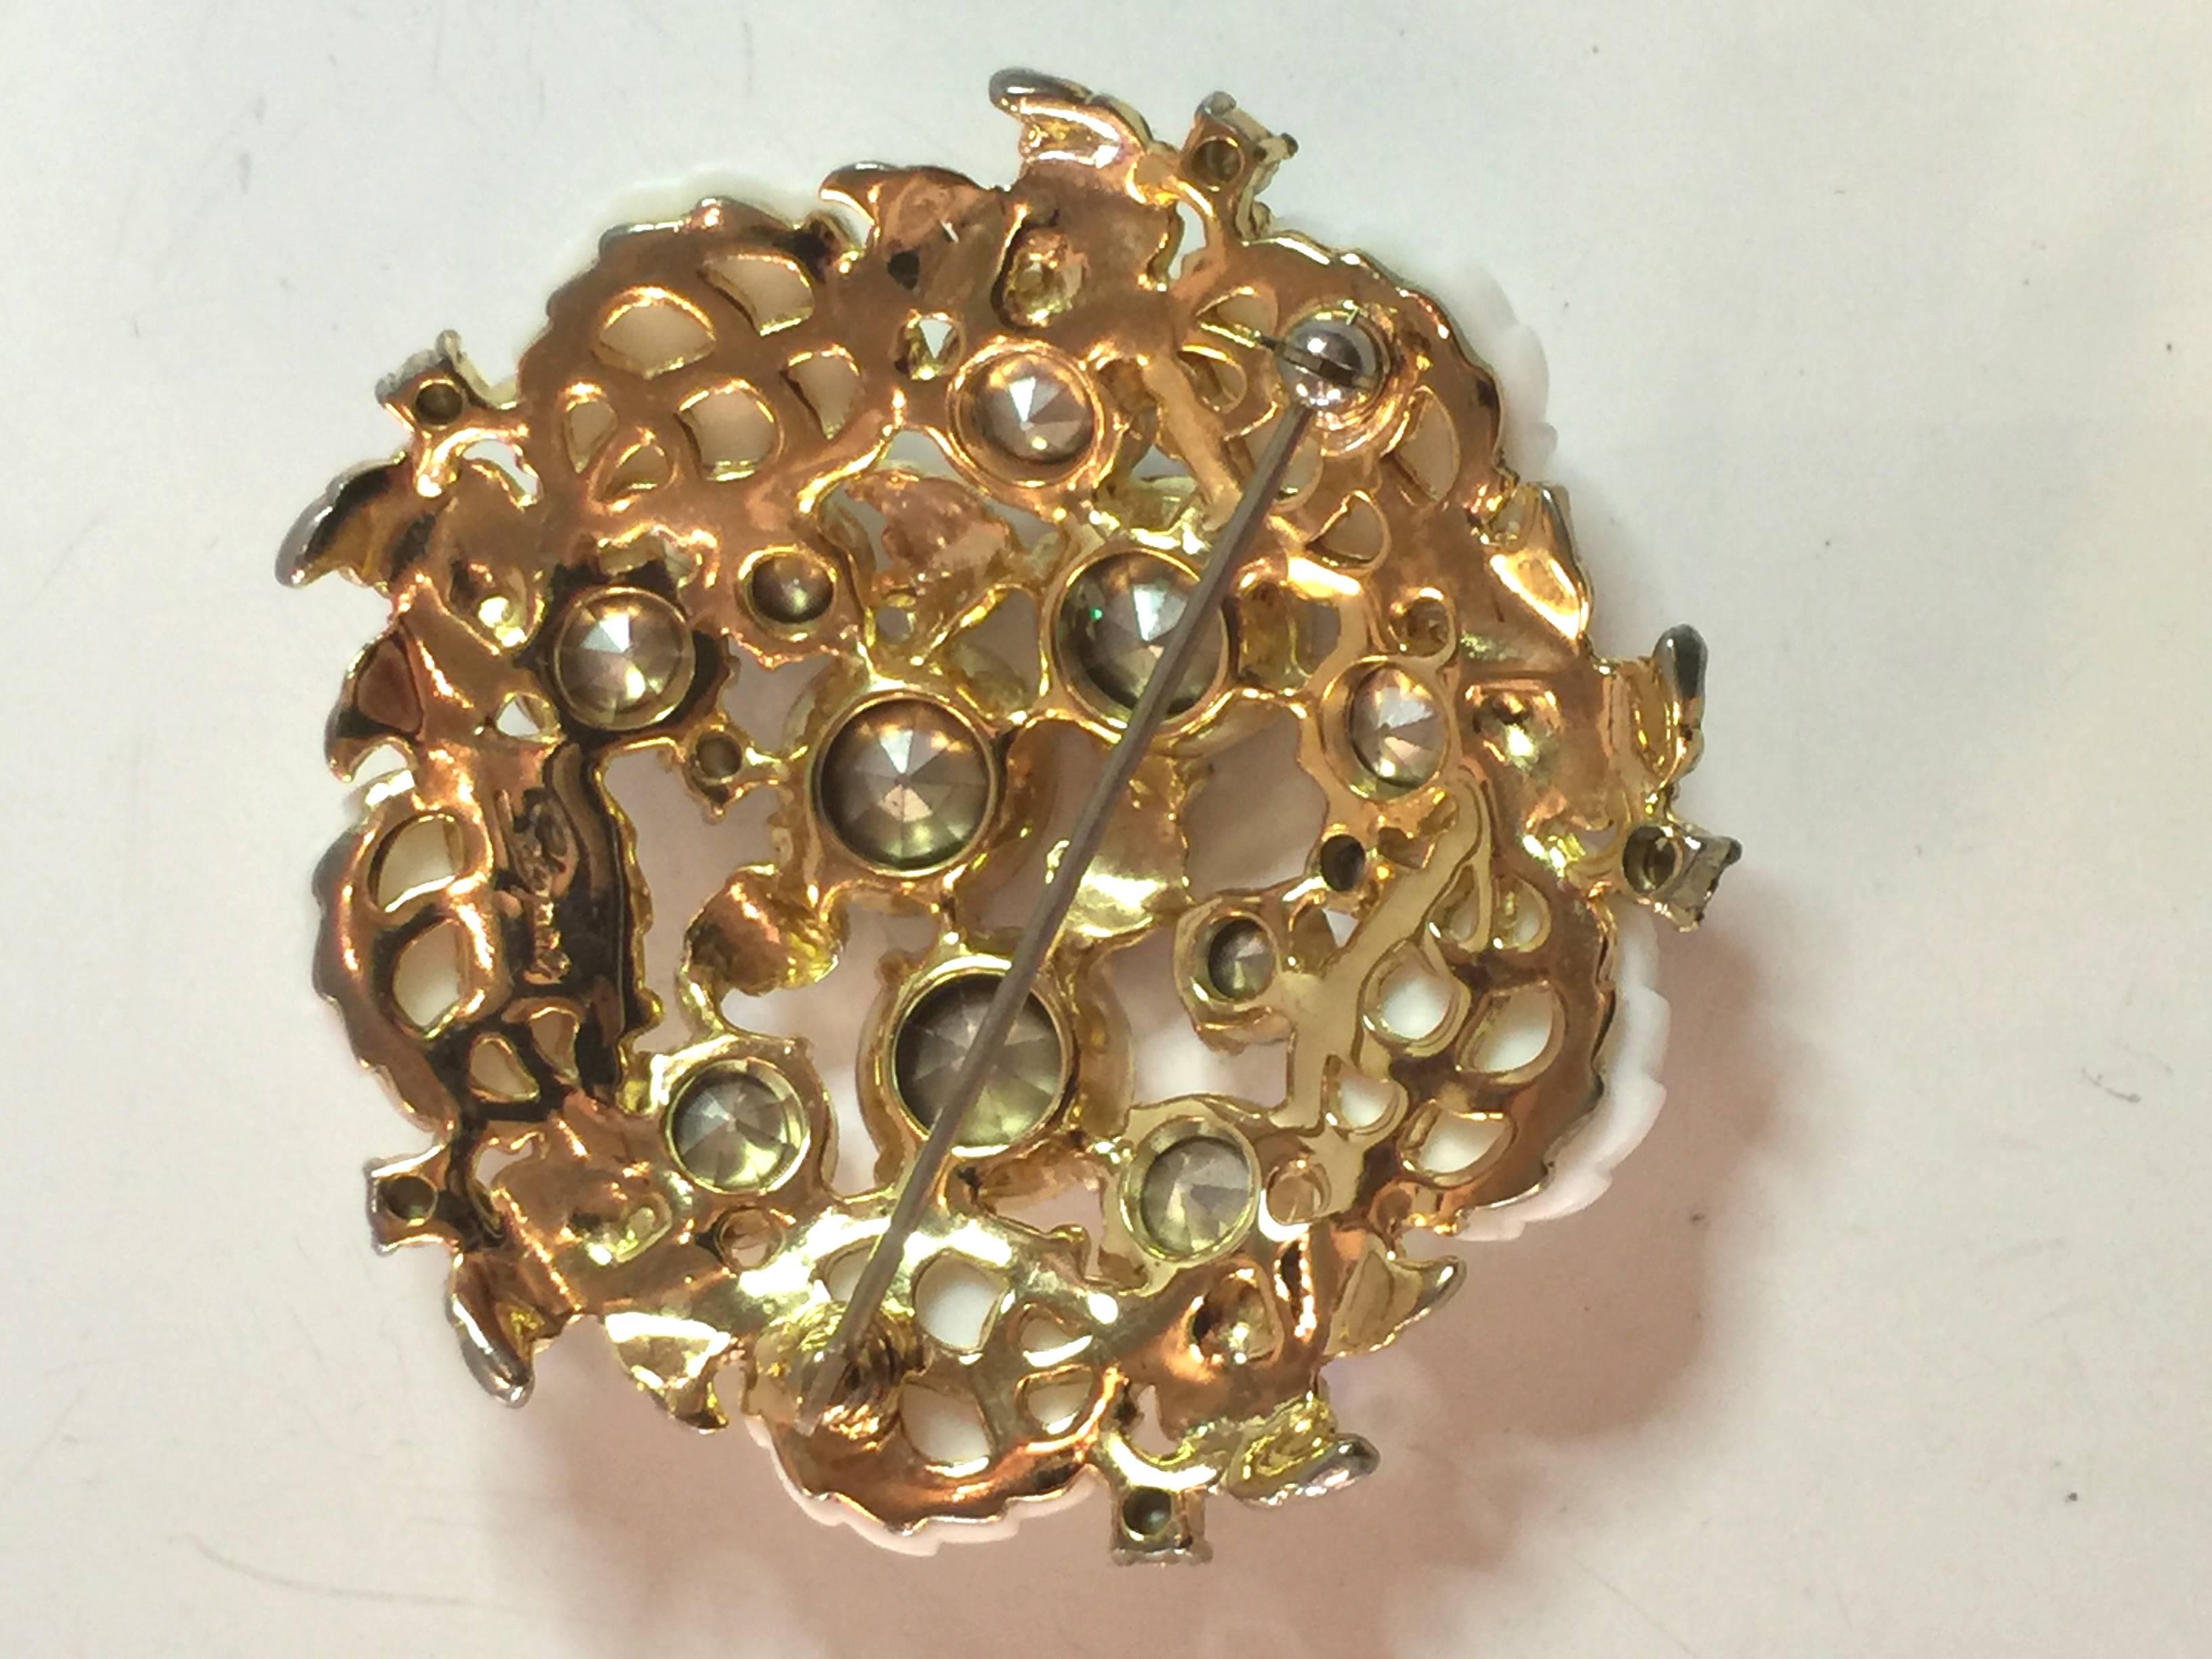 Confection-like and dazzling, this wonderful white 1950s SCHIAPARELLI Borealis  Rhinestone Goldtone Floral Brooch Pin sparkles with a sweet sugary lightness... rare and completely alluring. Unusual molded leaf borealis stones glow in rainbow hues,